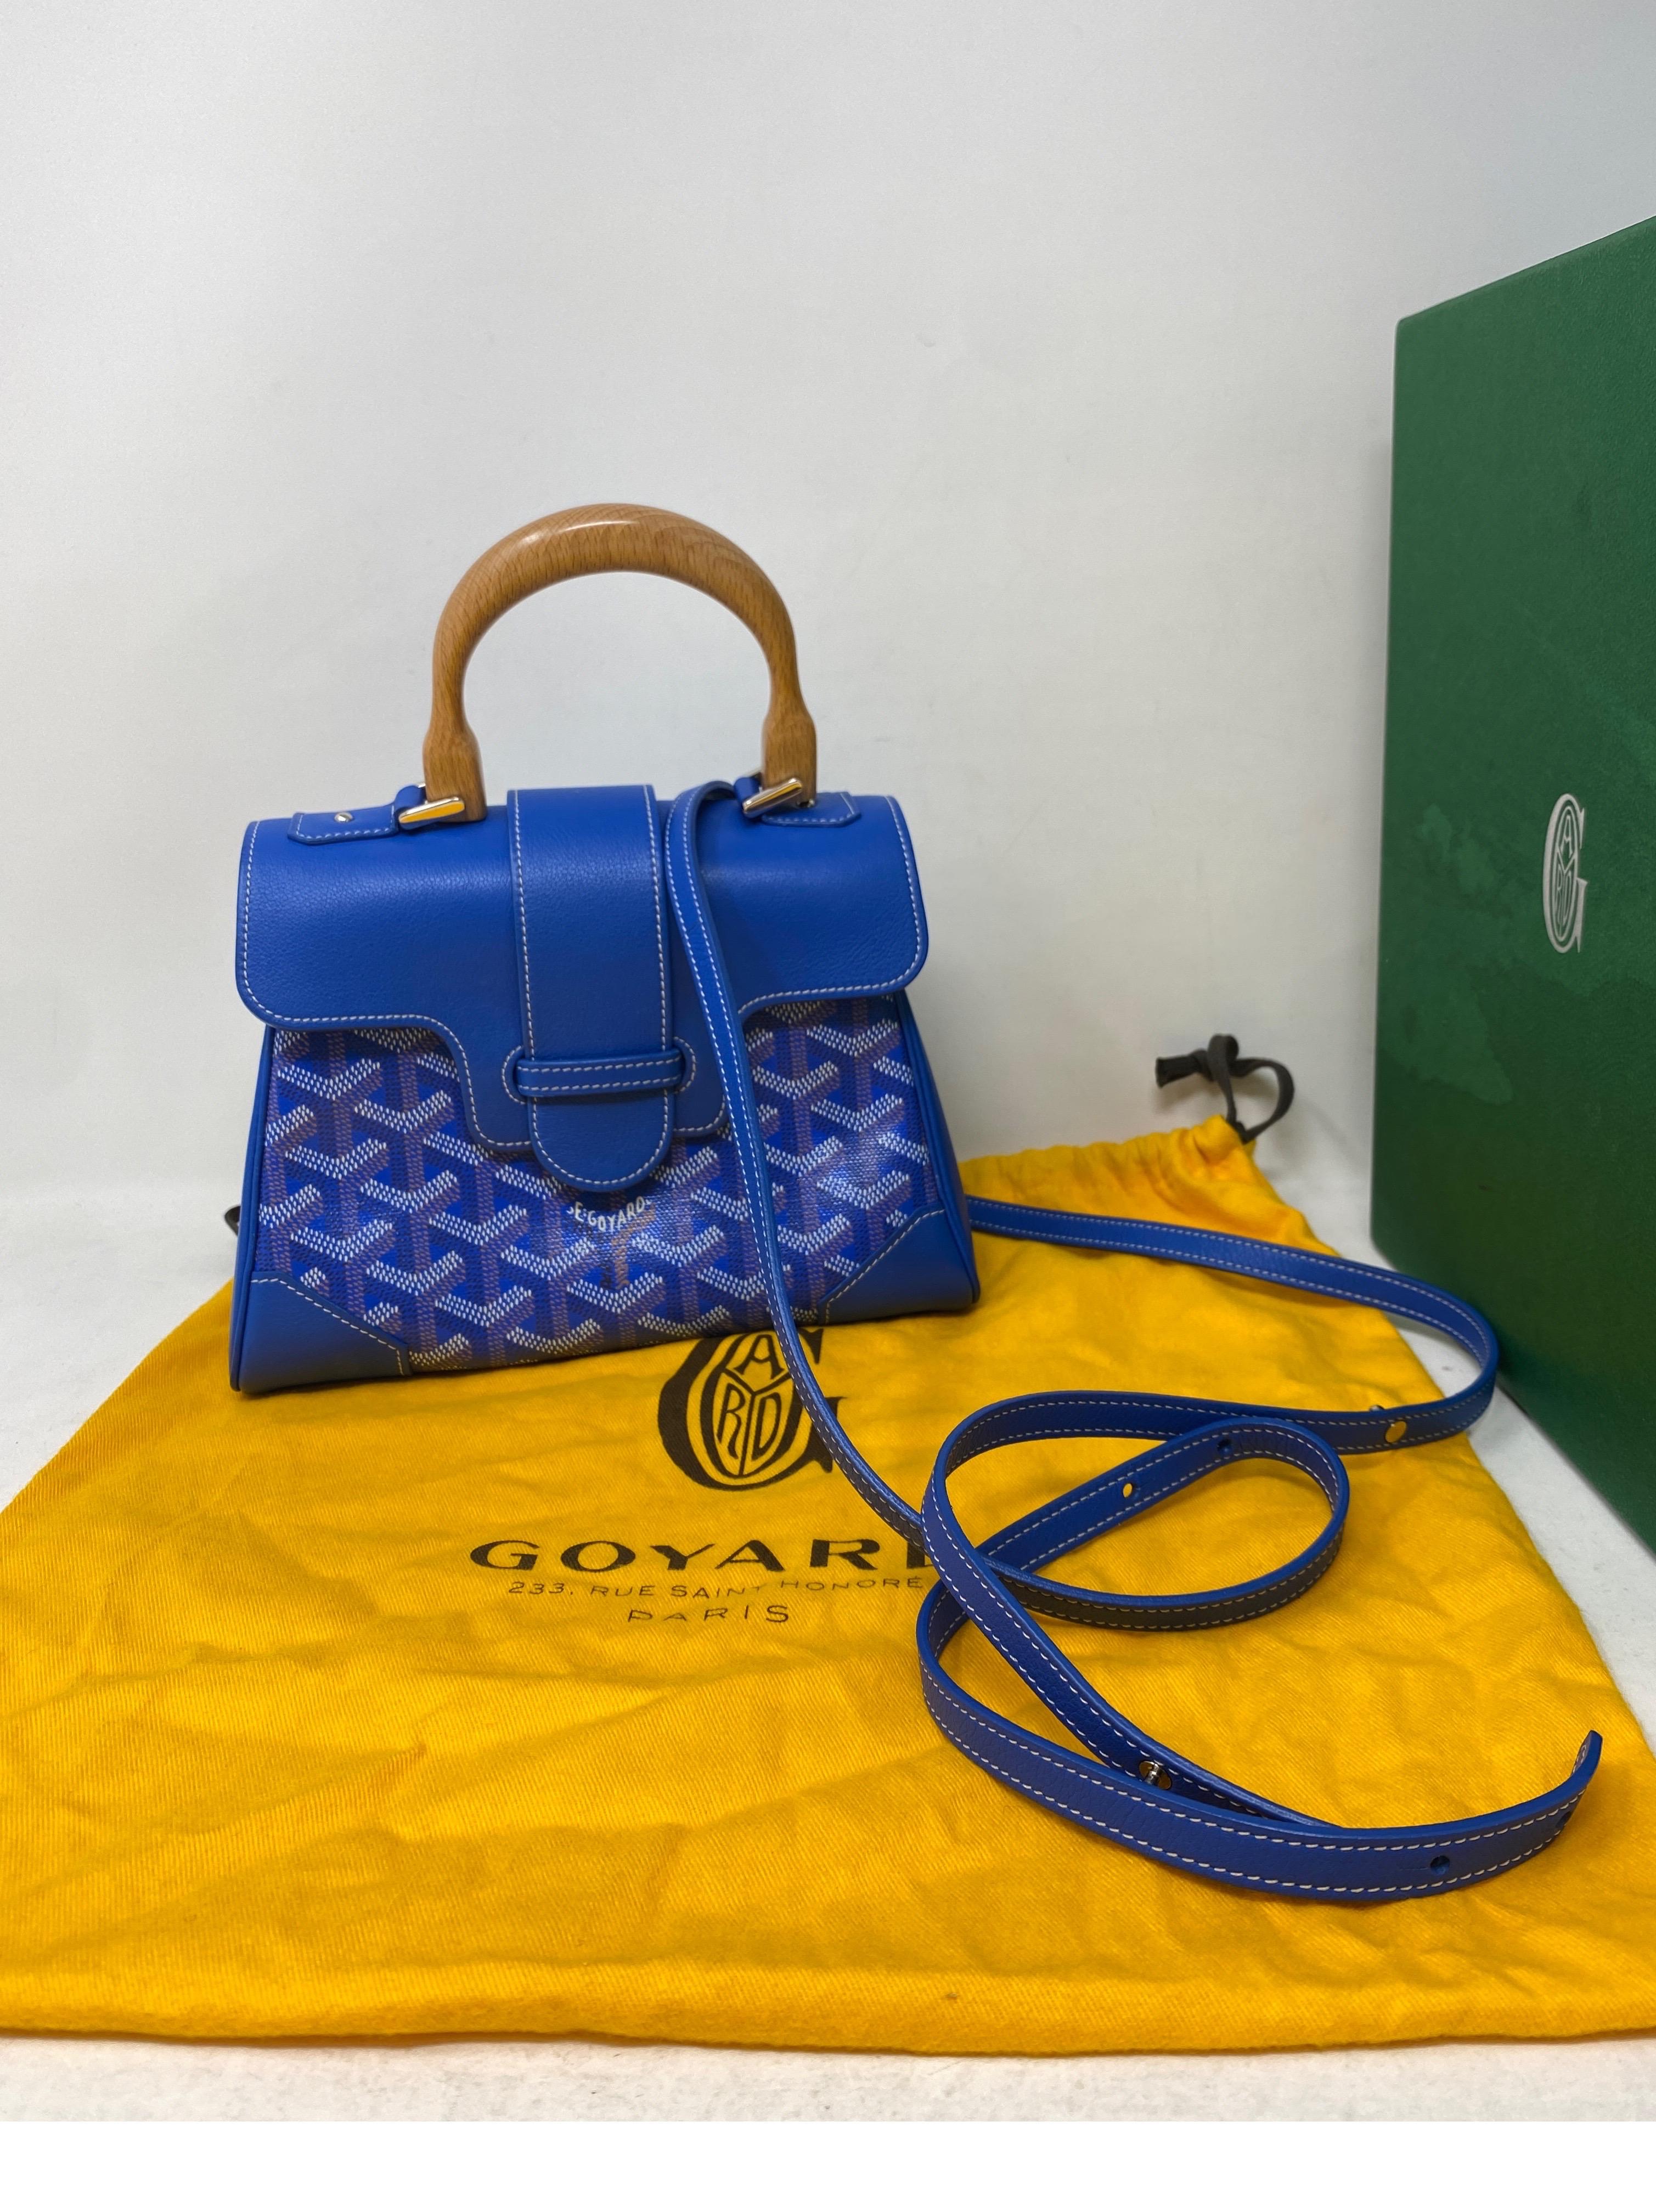 Goyard Mini Blue Saigon Bag. Mint like new condition. Can be worn as a crossbody bag or top handle bag. Rare size and color. Includes dust cover and box. Guaranteed authentic. 